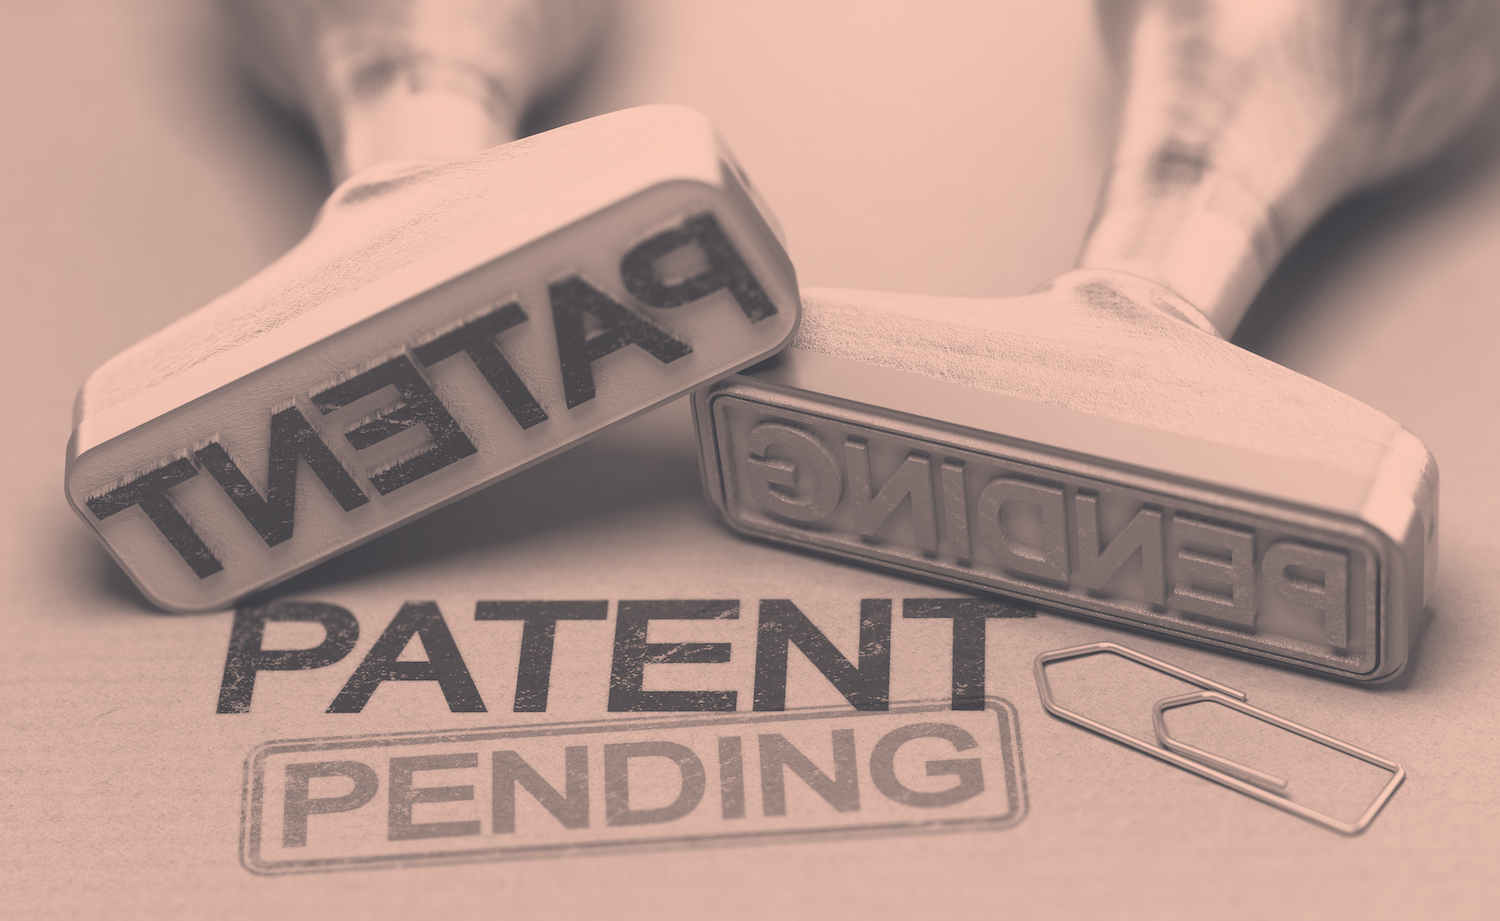 Two stamps spelling out "patent pending."